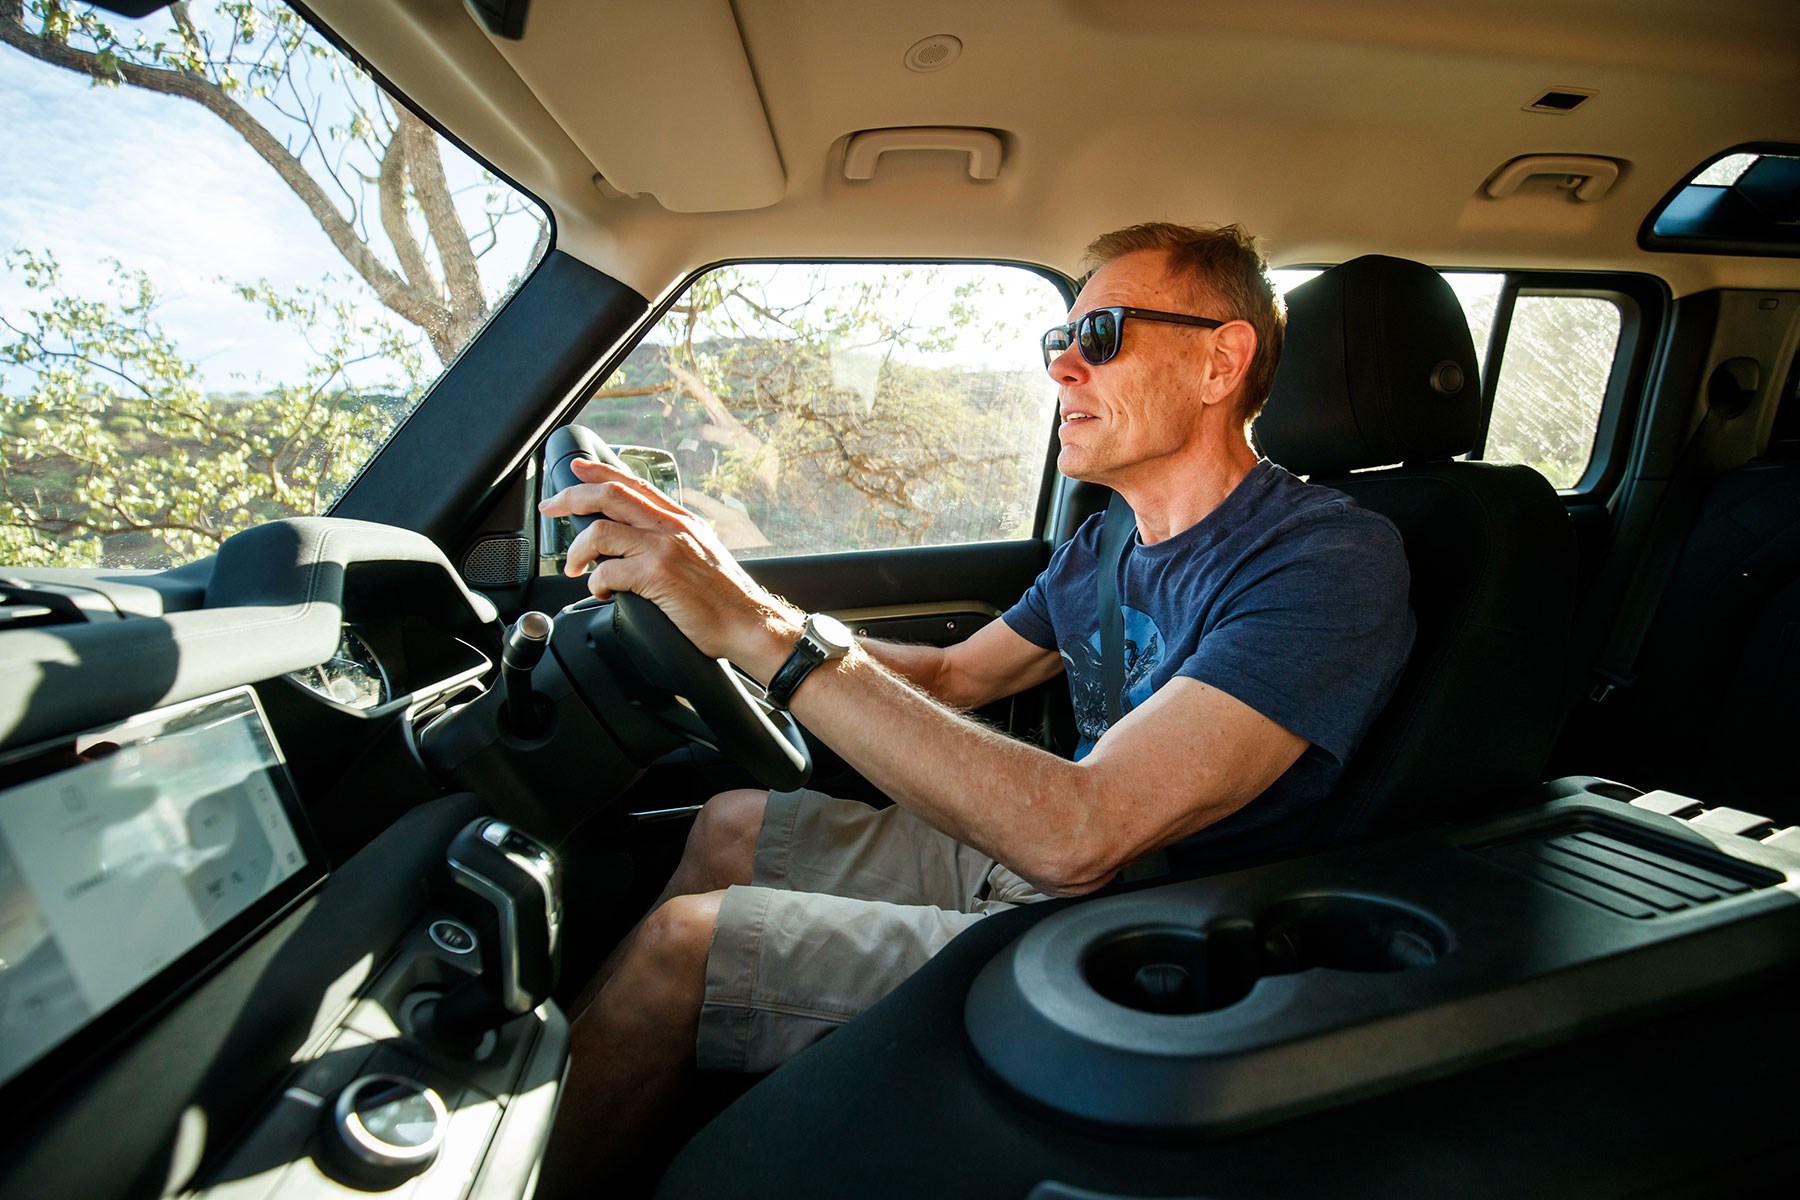 Author Gavin Green reviews the new Land Rover Defender D240